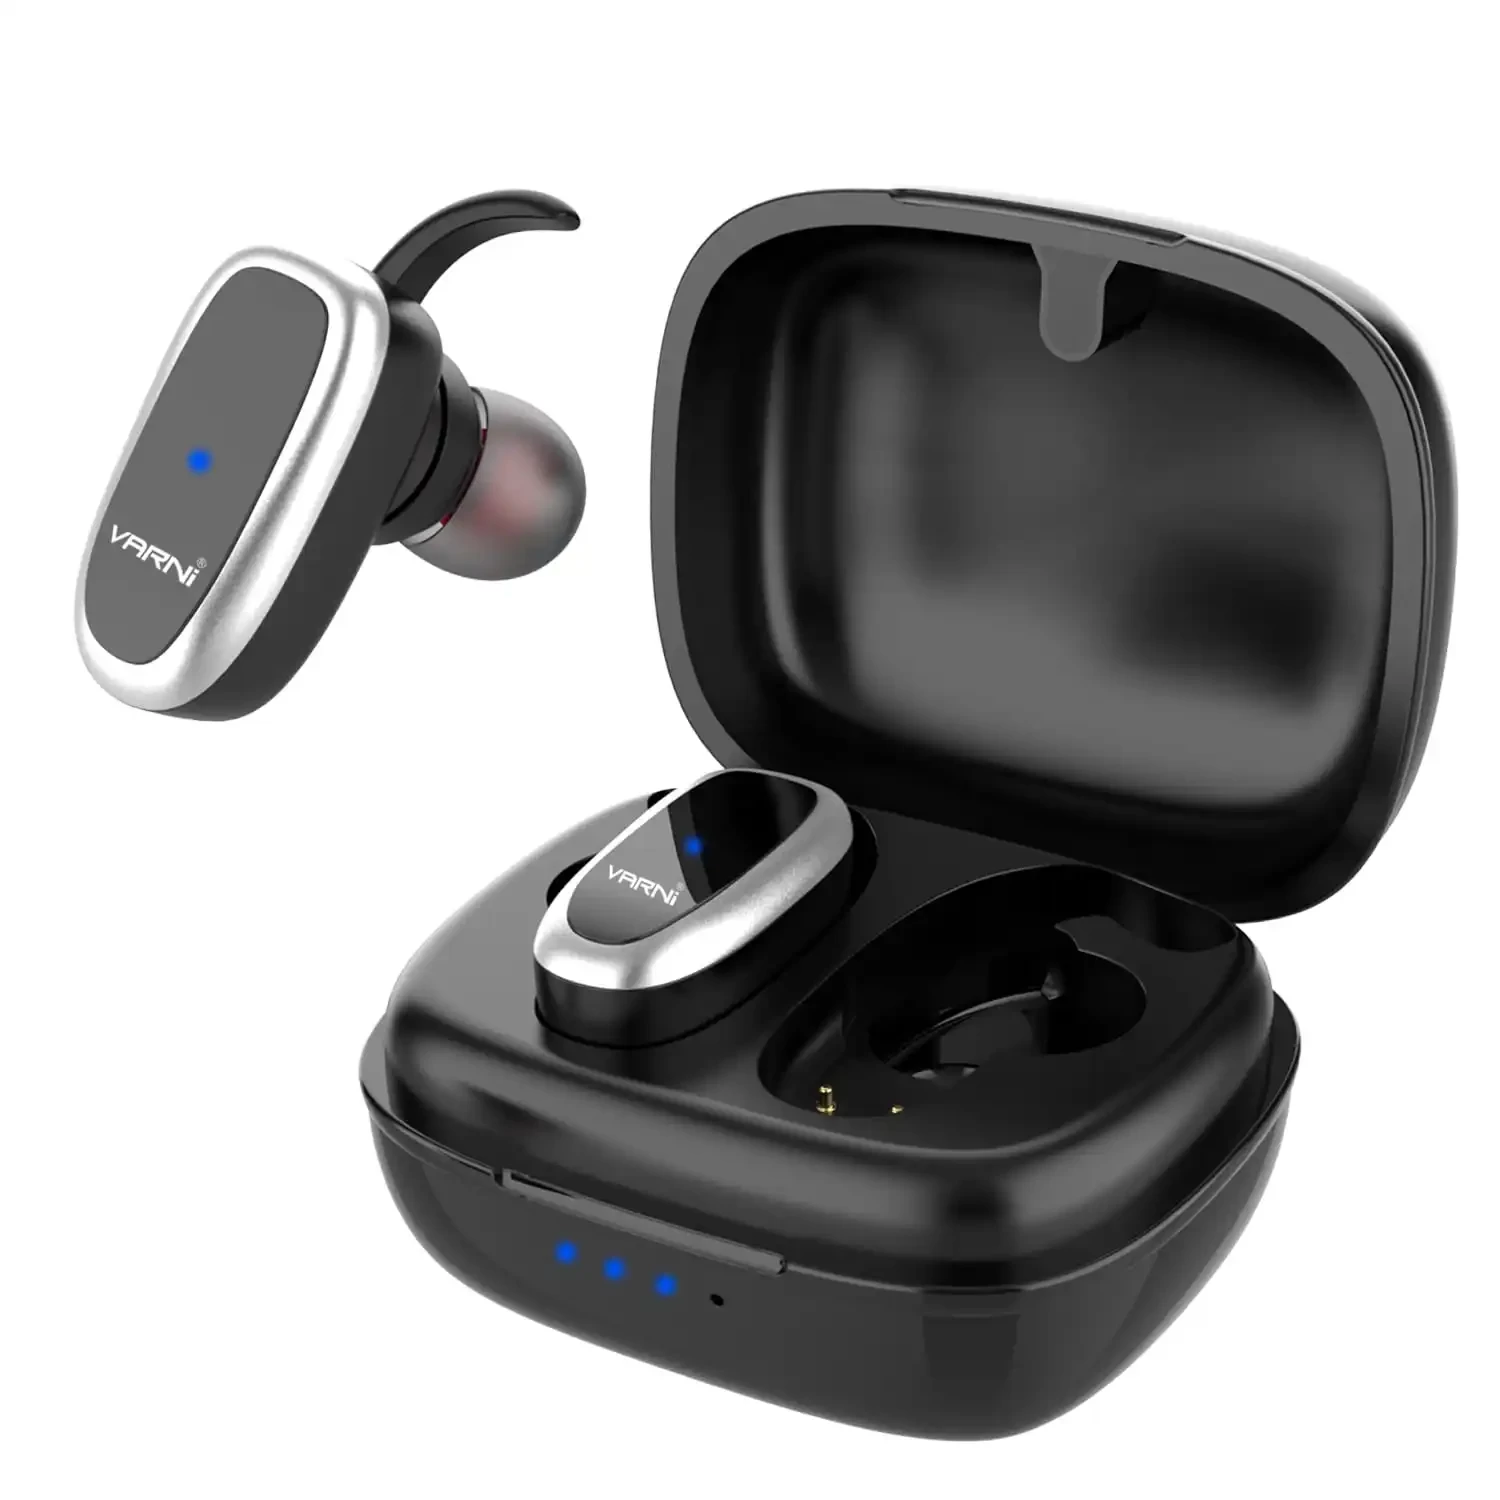 Wireless Earbuds Bluetooth 5.0 with Microphone Ultra Compact in-Ear Headphones 18H Playtime HD Sound Quality with USB-C Charging Case Black 